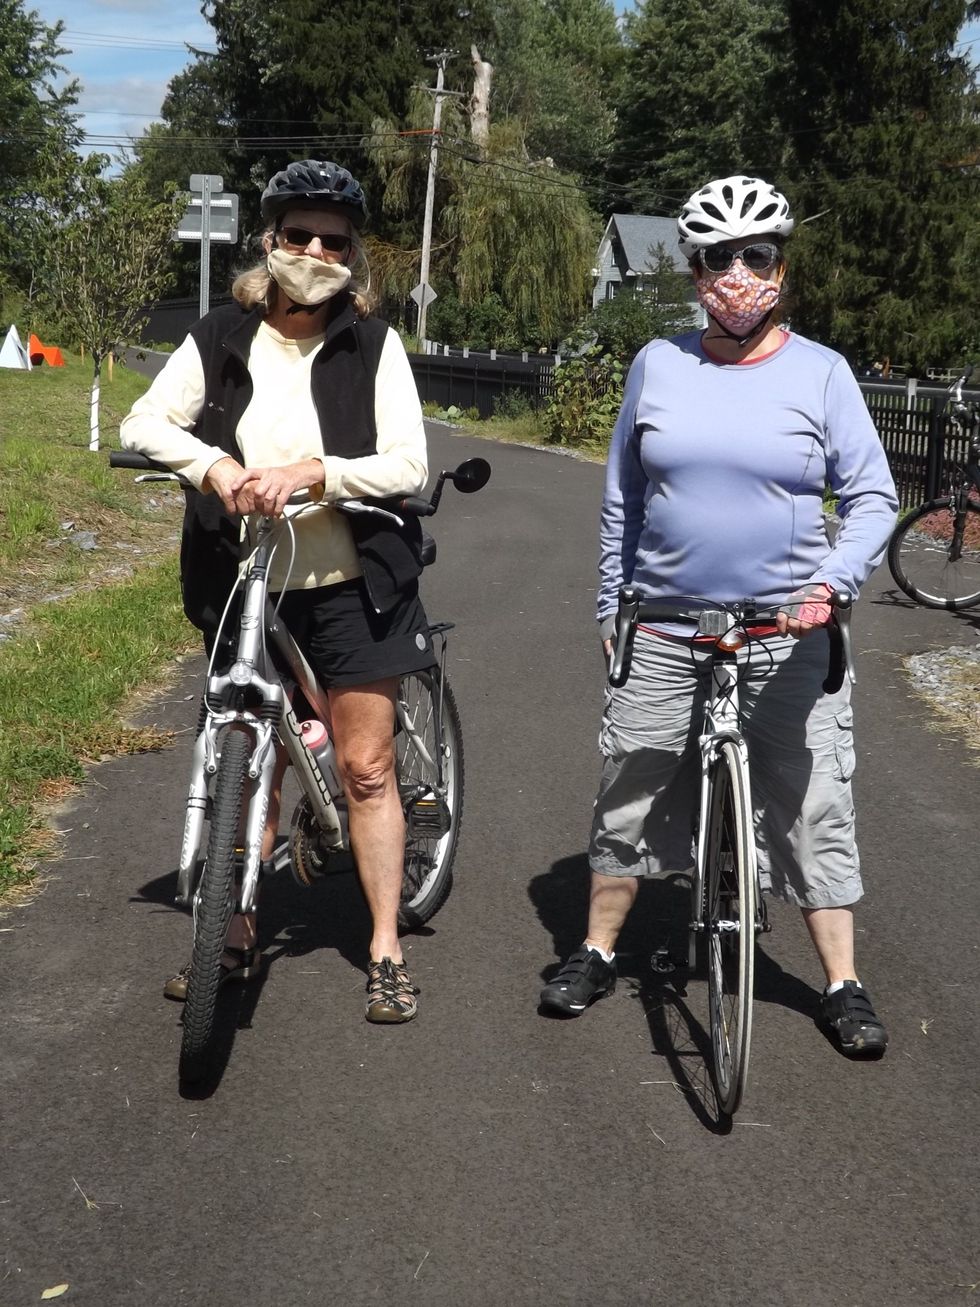 The path is paved!: Trail to Train links Wassaic station to hamlet’s center